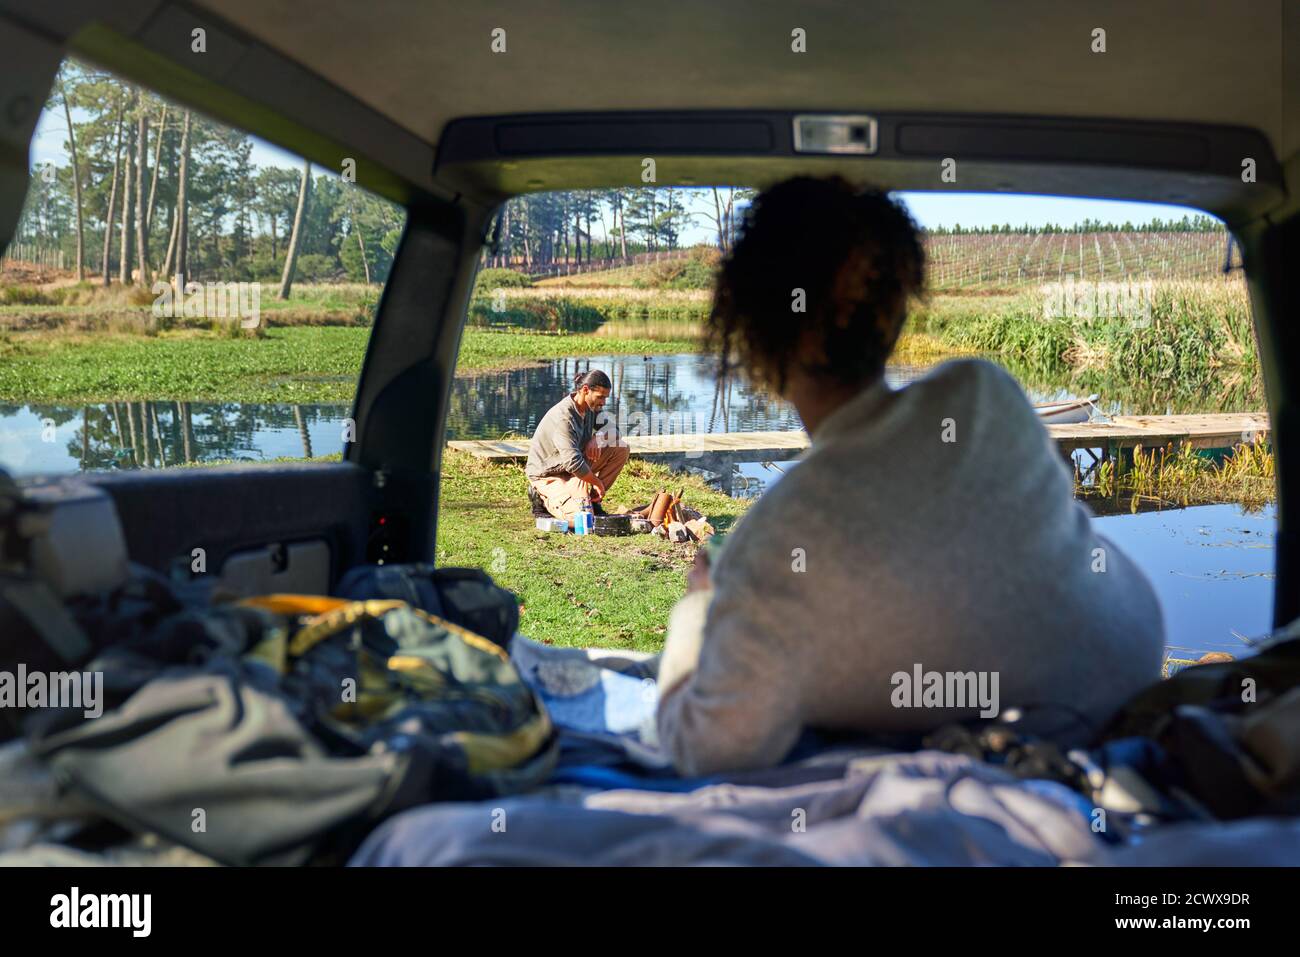 Young woman in car watching boyfriend prepare campfire Stock Photo